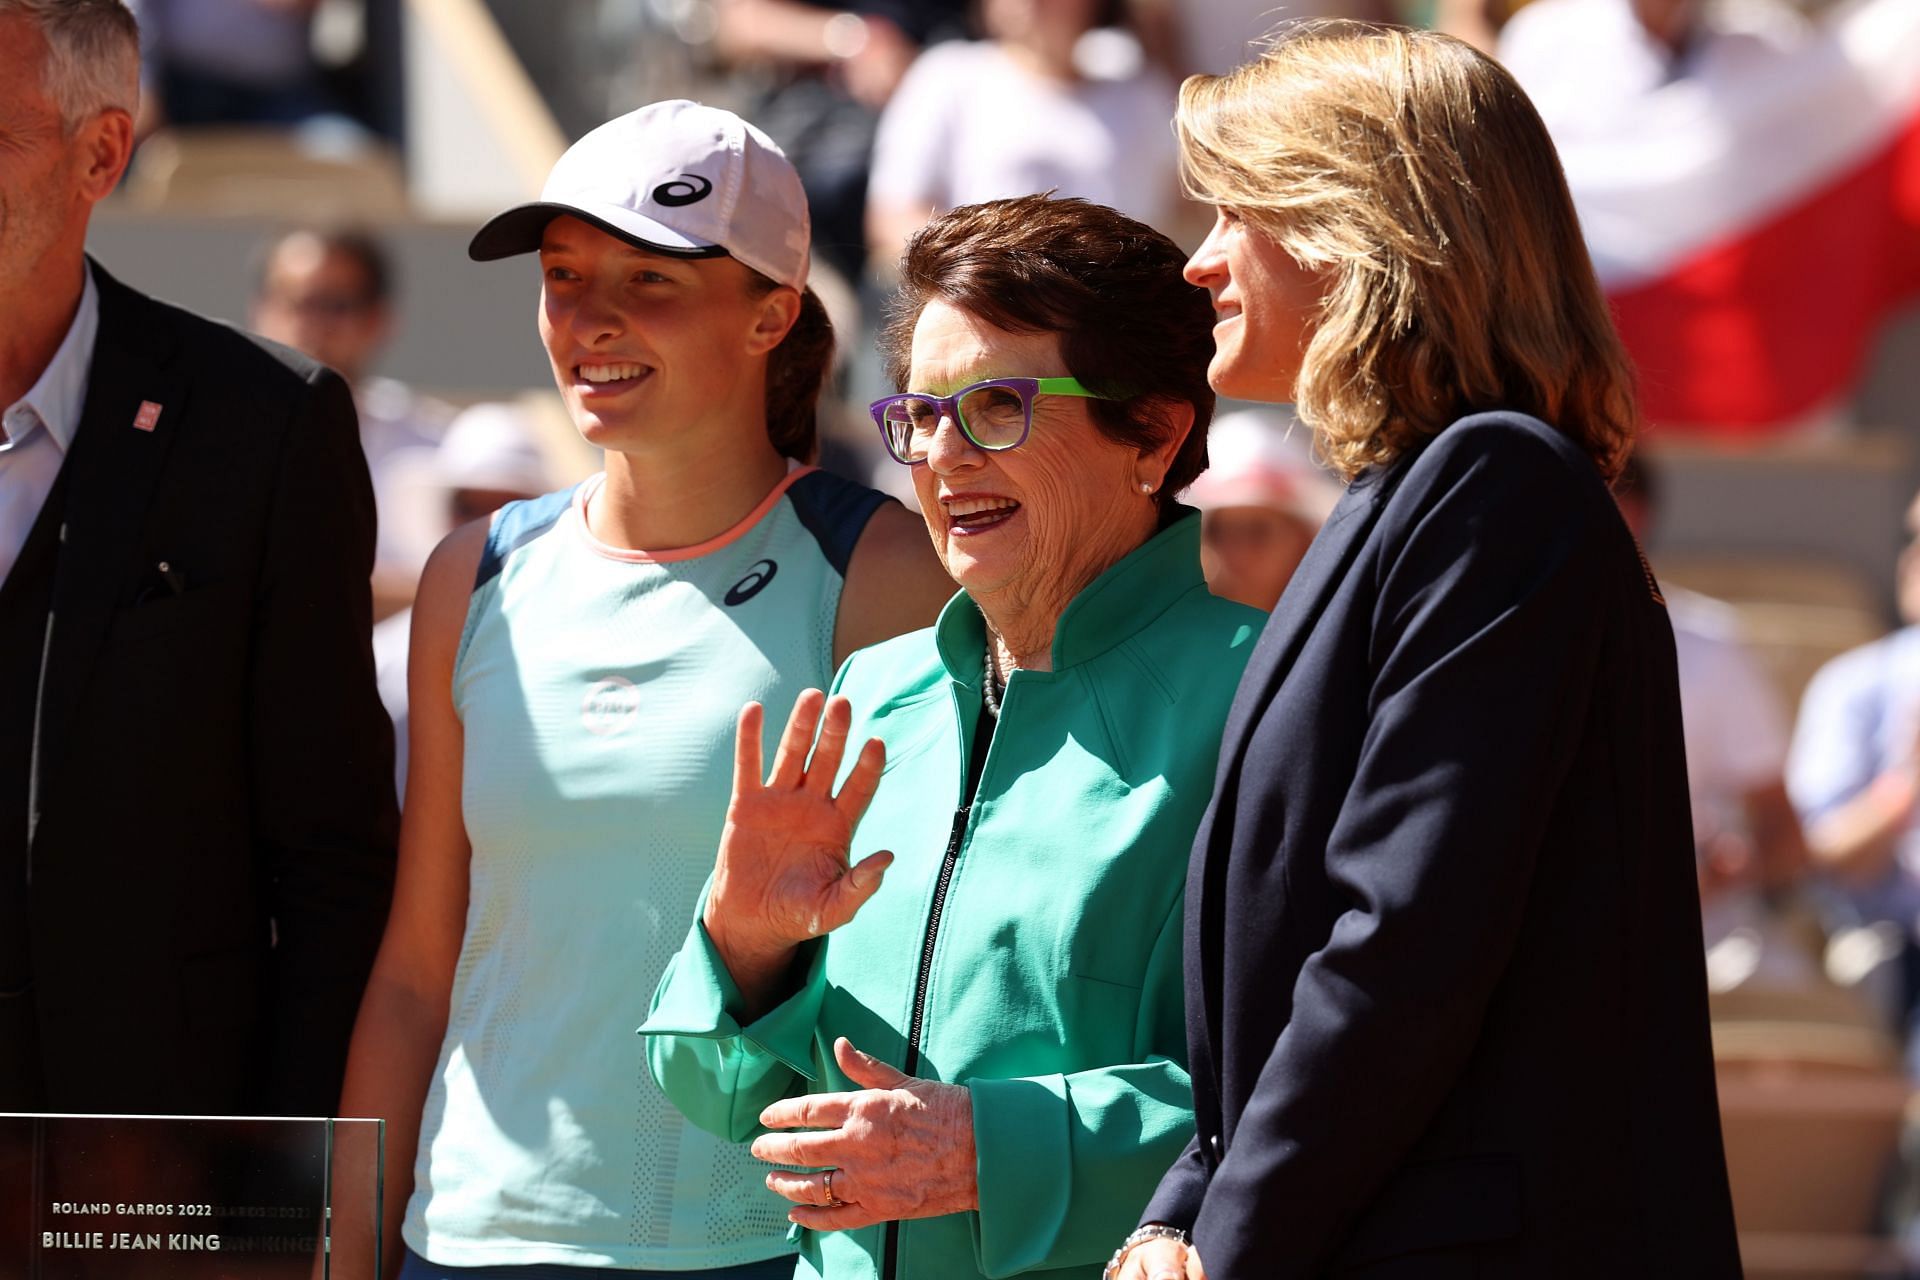 Billie Jean King flanked by Iga Swiatek and Amelie Mauresmo at the 2022 French Open